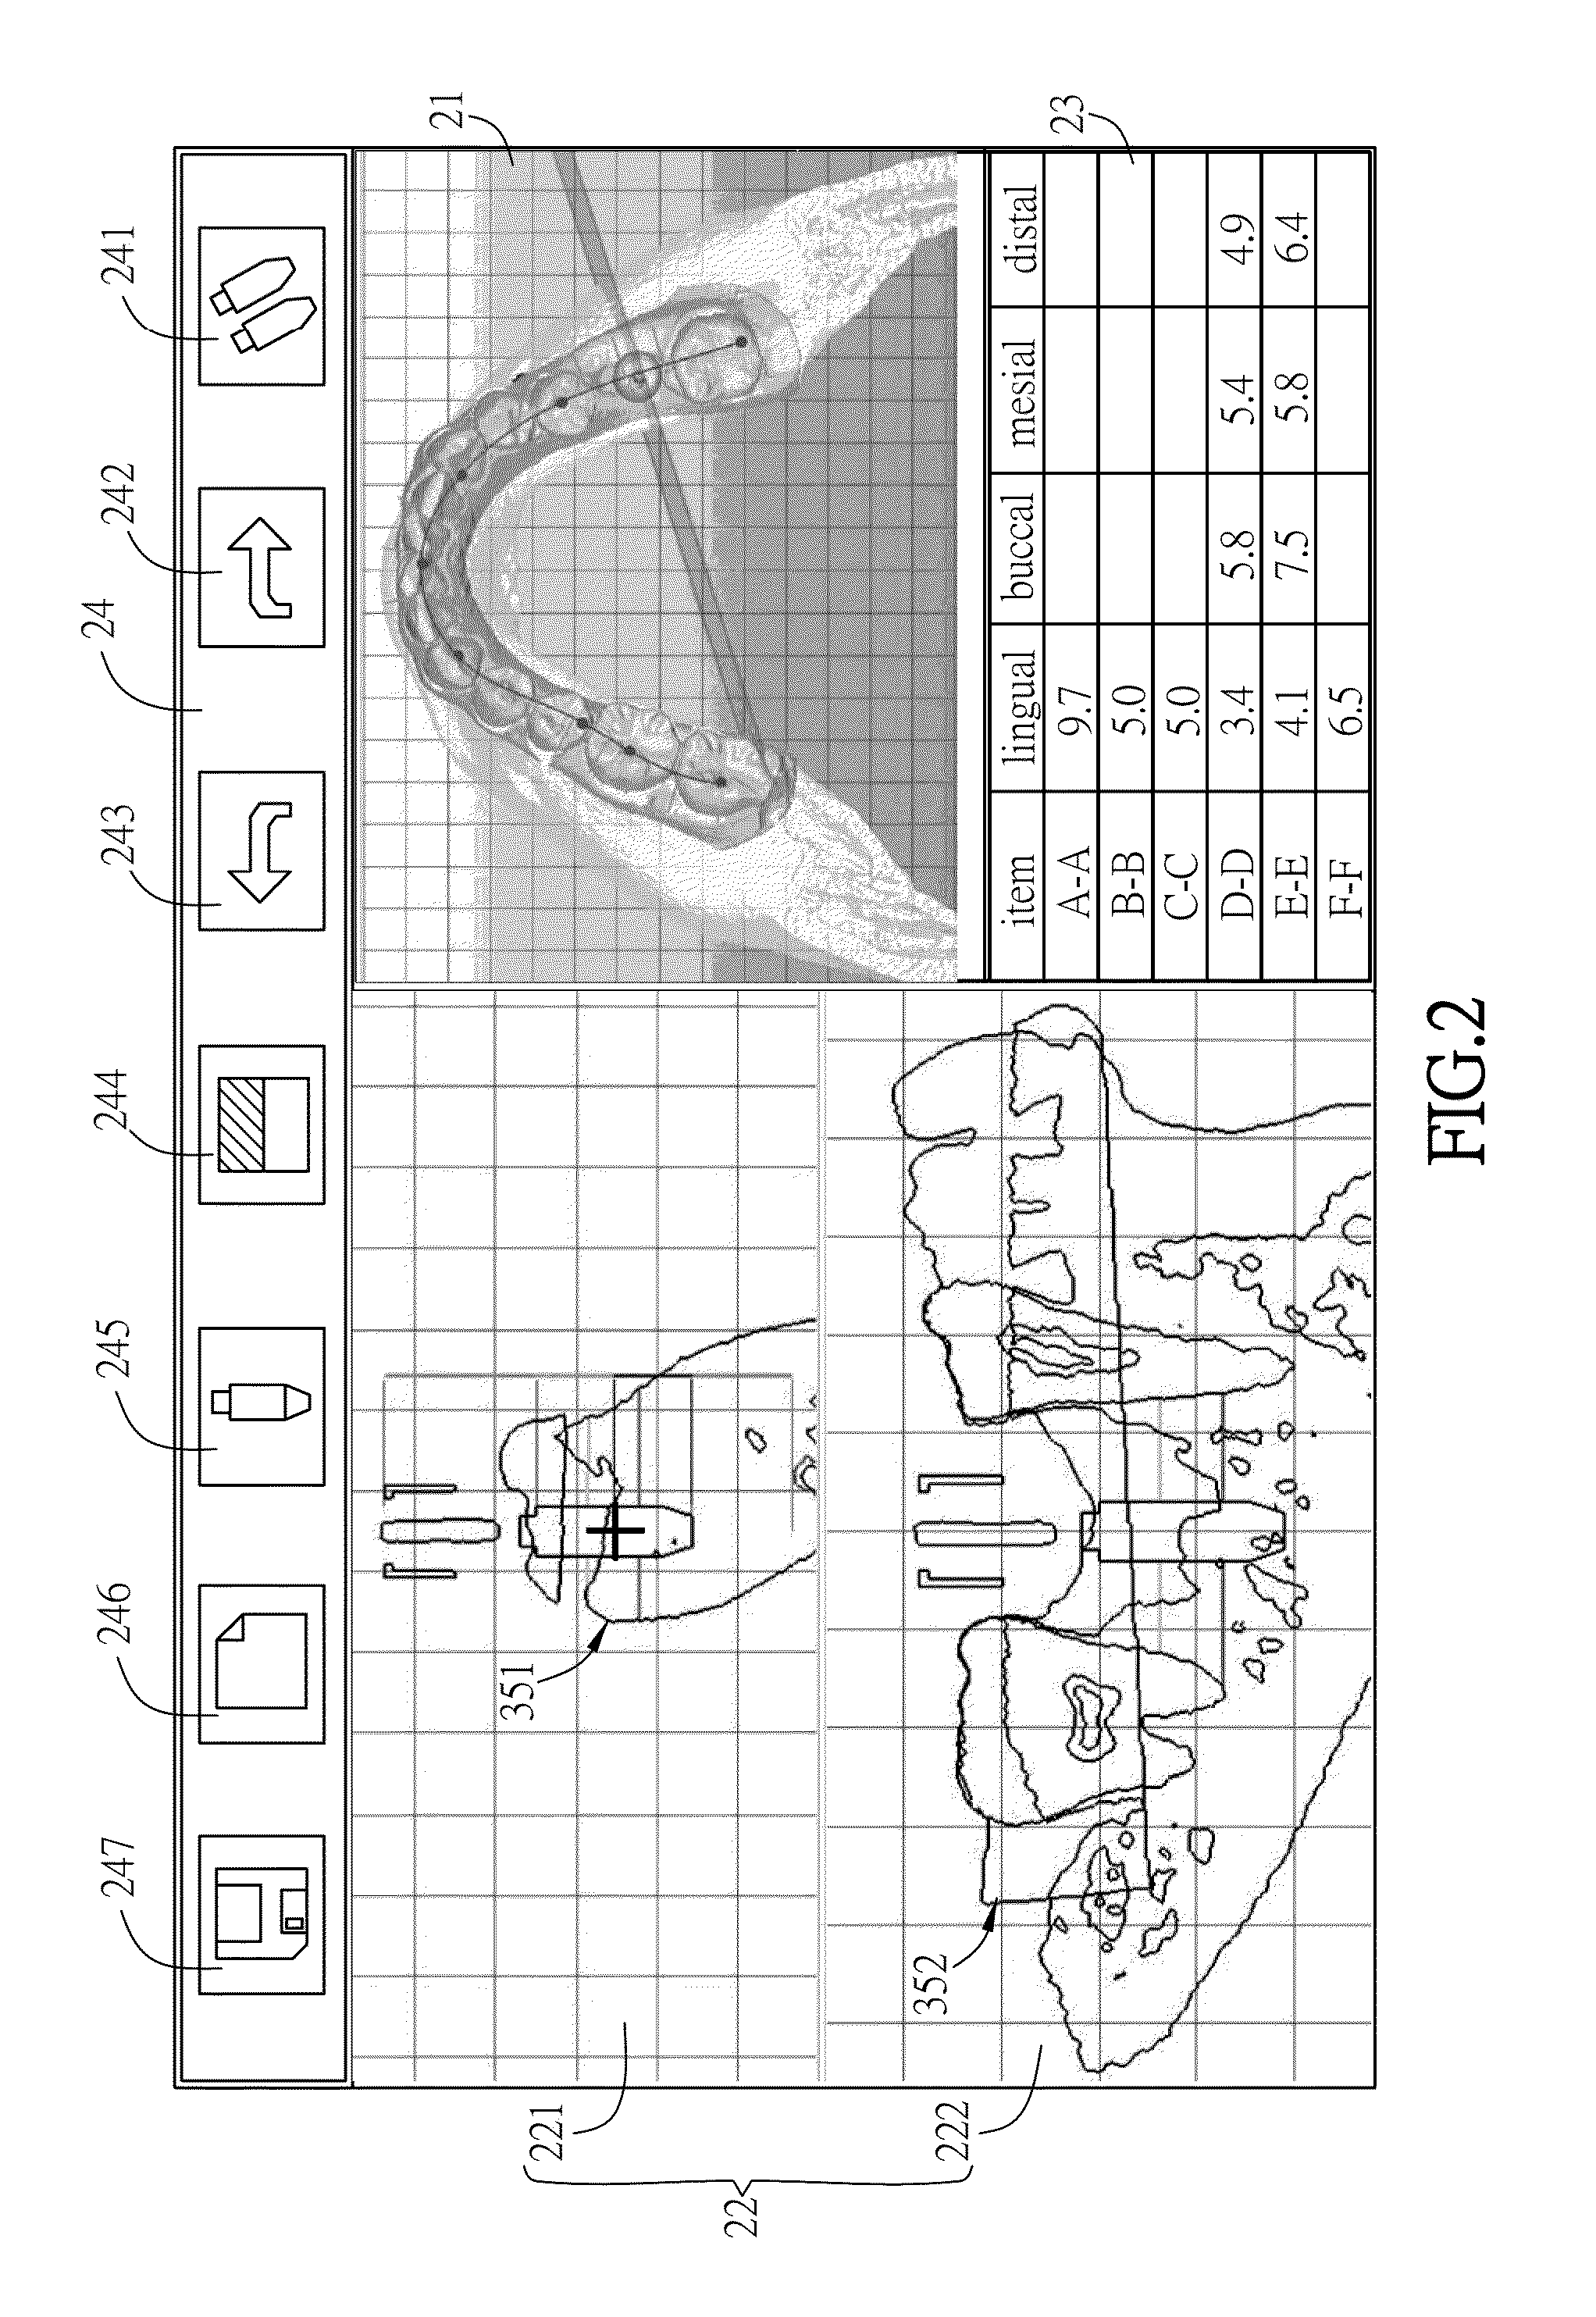 Method and system for dental implant path planning